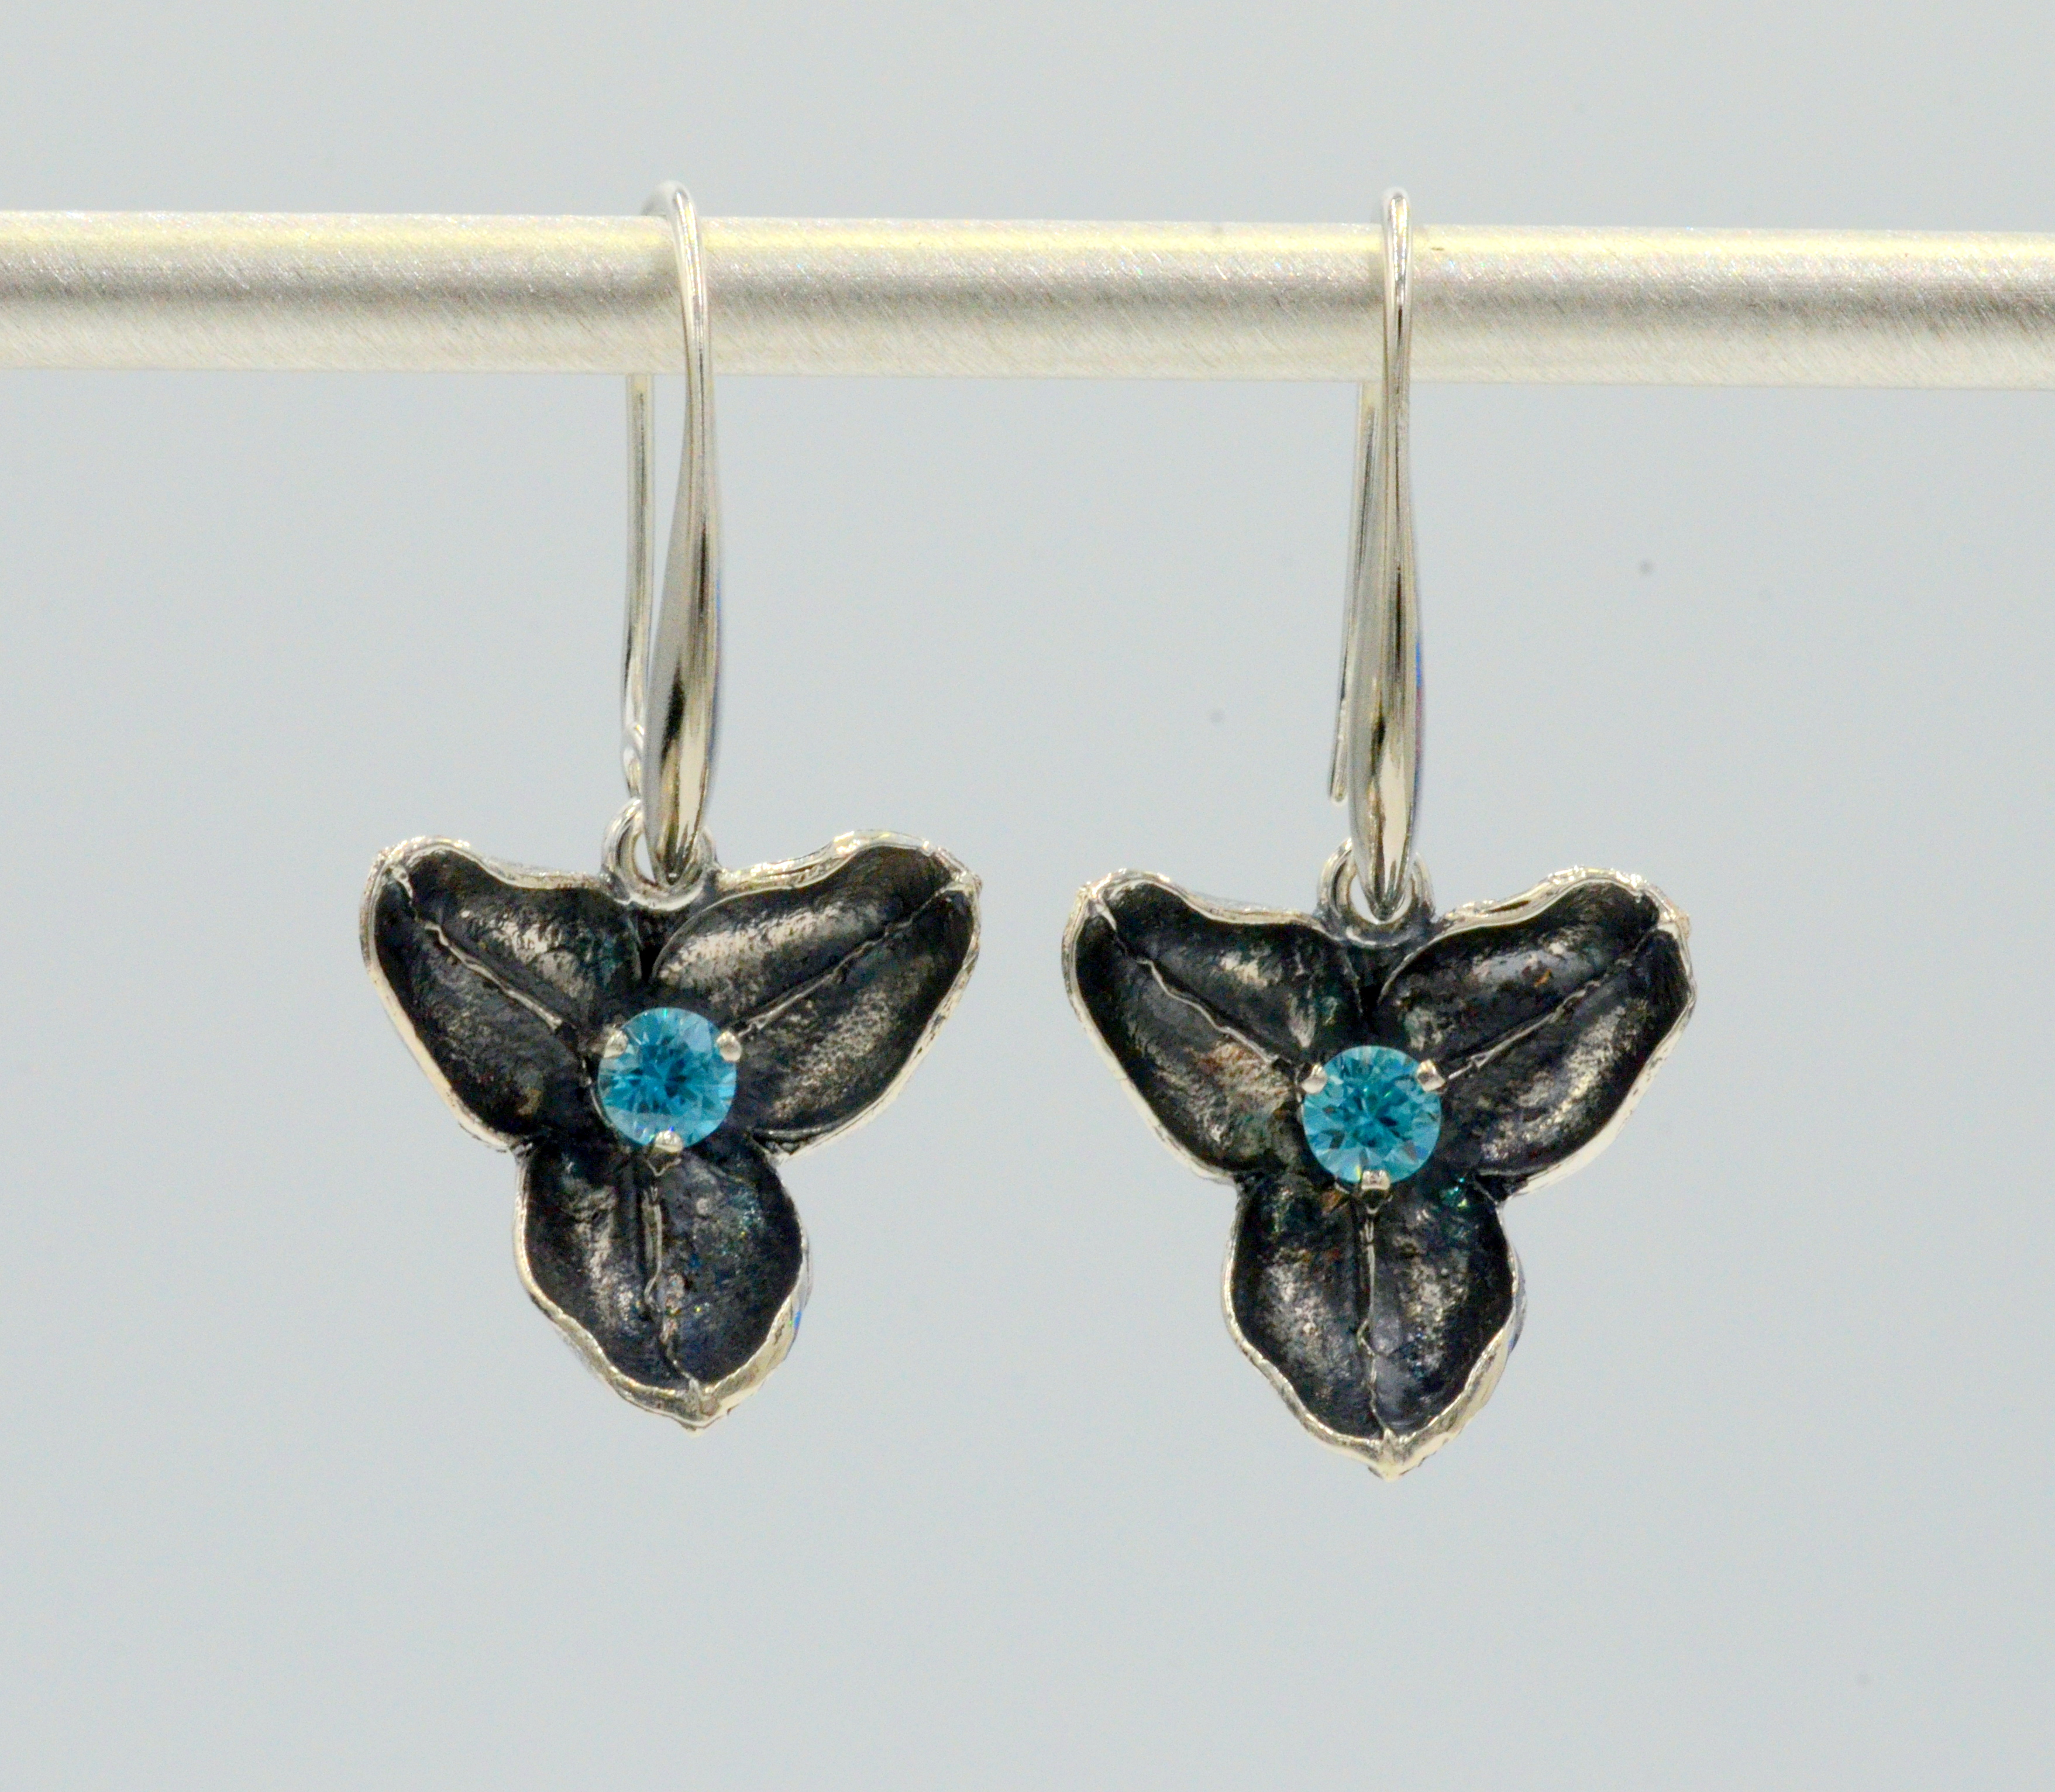 Natural Leaf converted into a solid Sterling Silver Euro Charm.Set with beautiful Blue Zircons. Comes with a Sterling Silver French wire earring or can be worn with our Euro Wires. Shy 3/4 inch square. Euro Charm Earrings to be worn with our signature Euro Wires. Go to "About Store" for more information in regard to our Euro Wires.